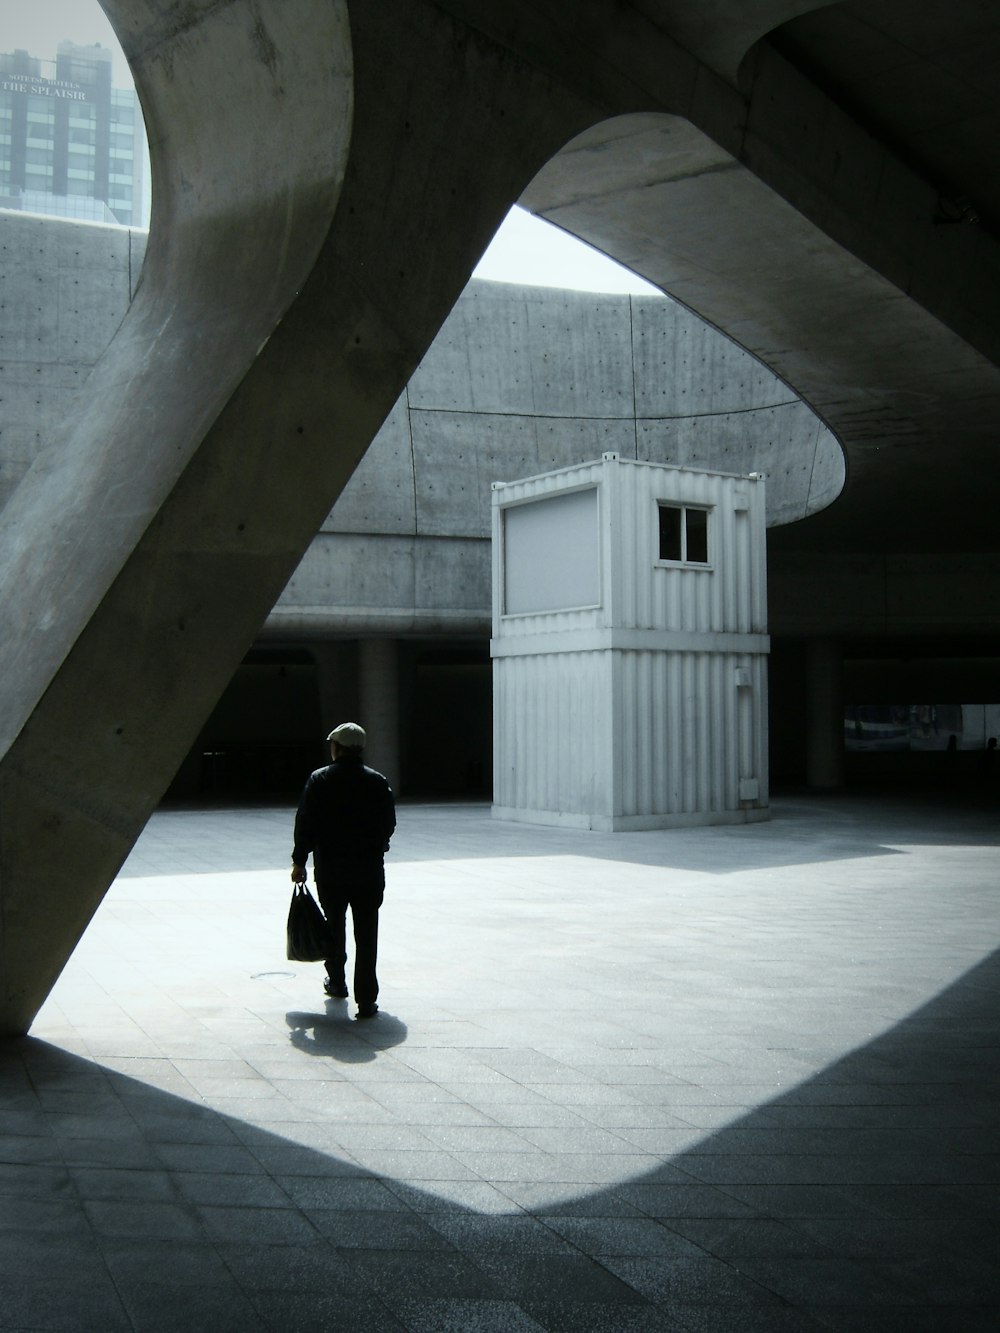 a man in a black jacket is standing in a courtyard